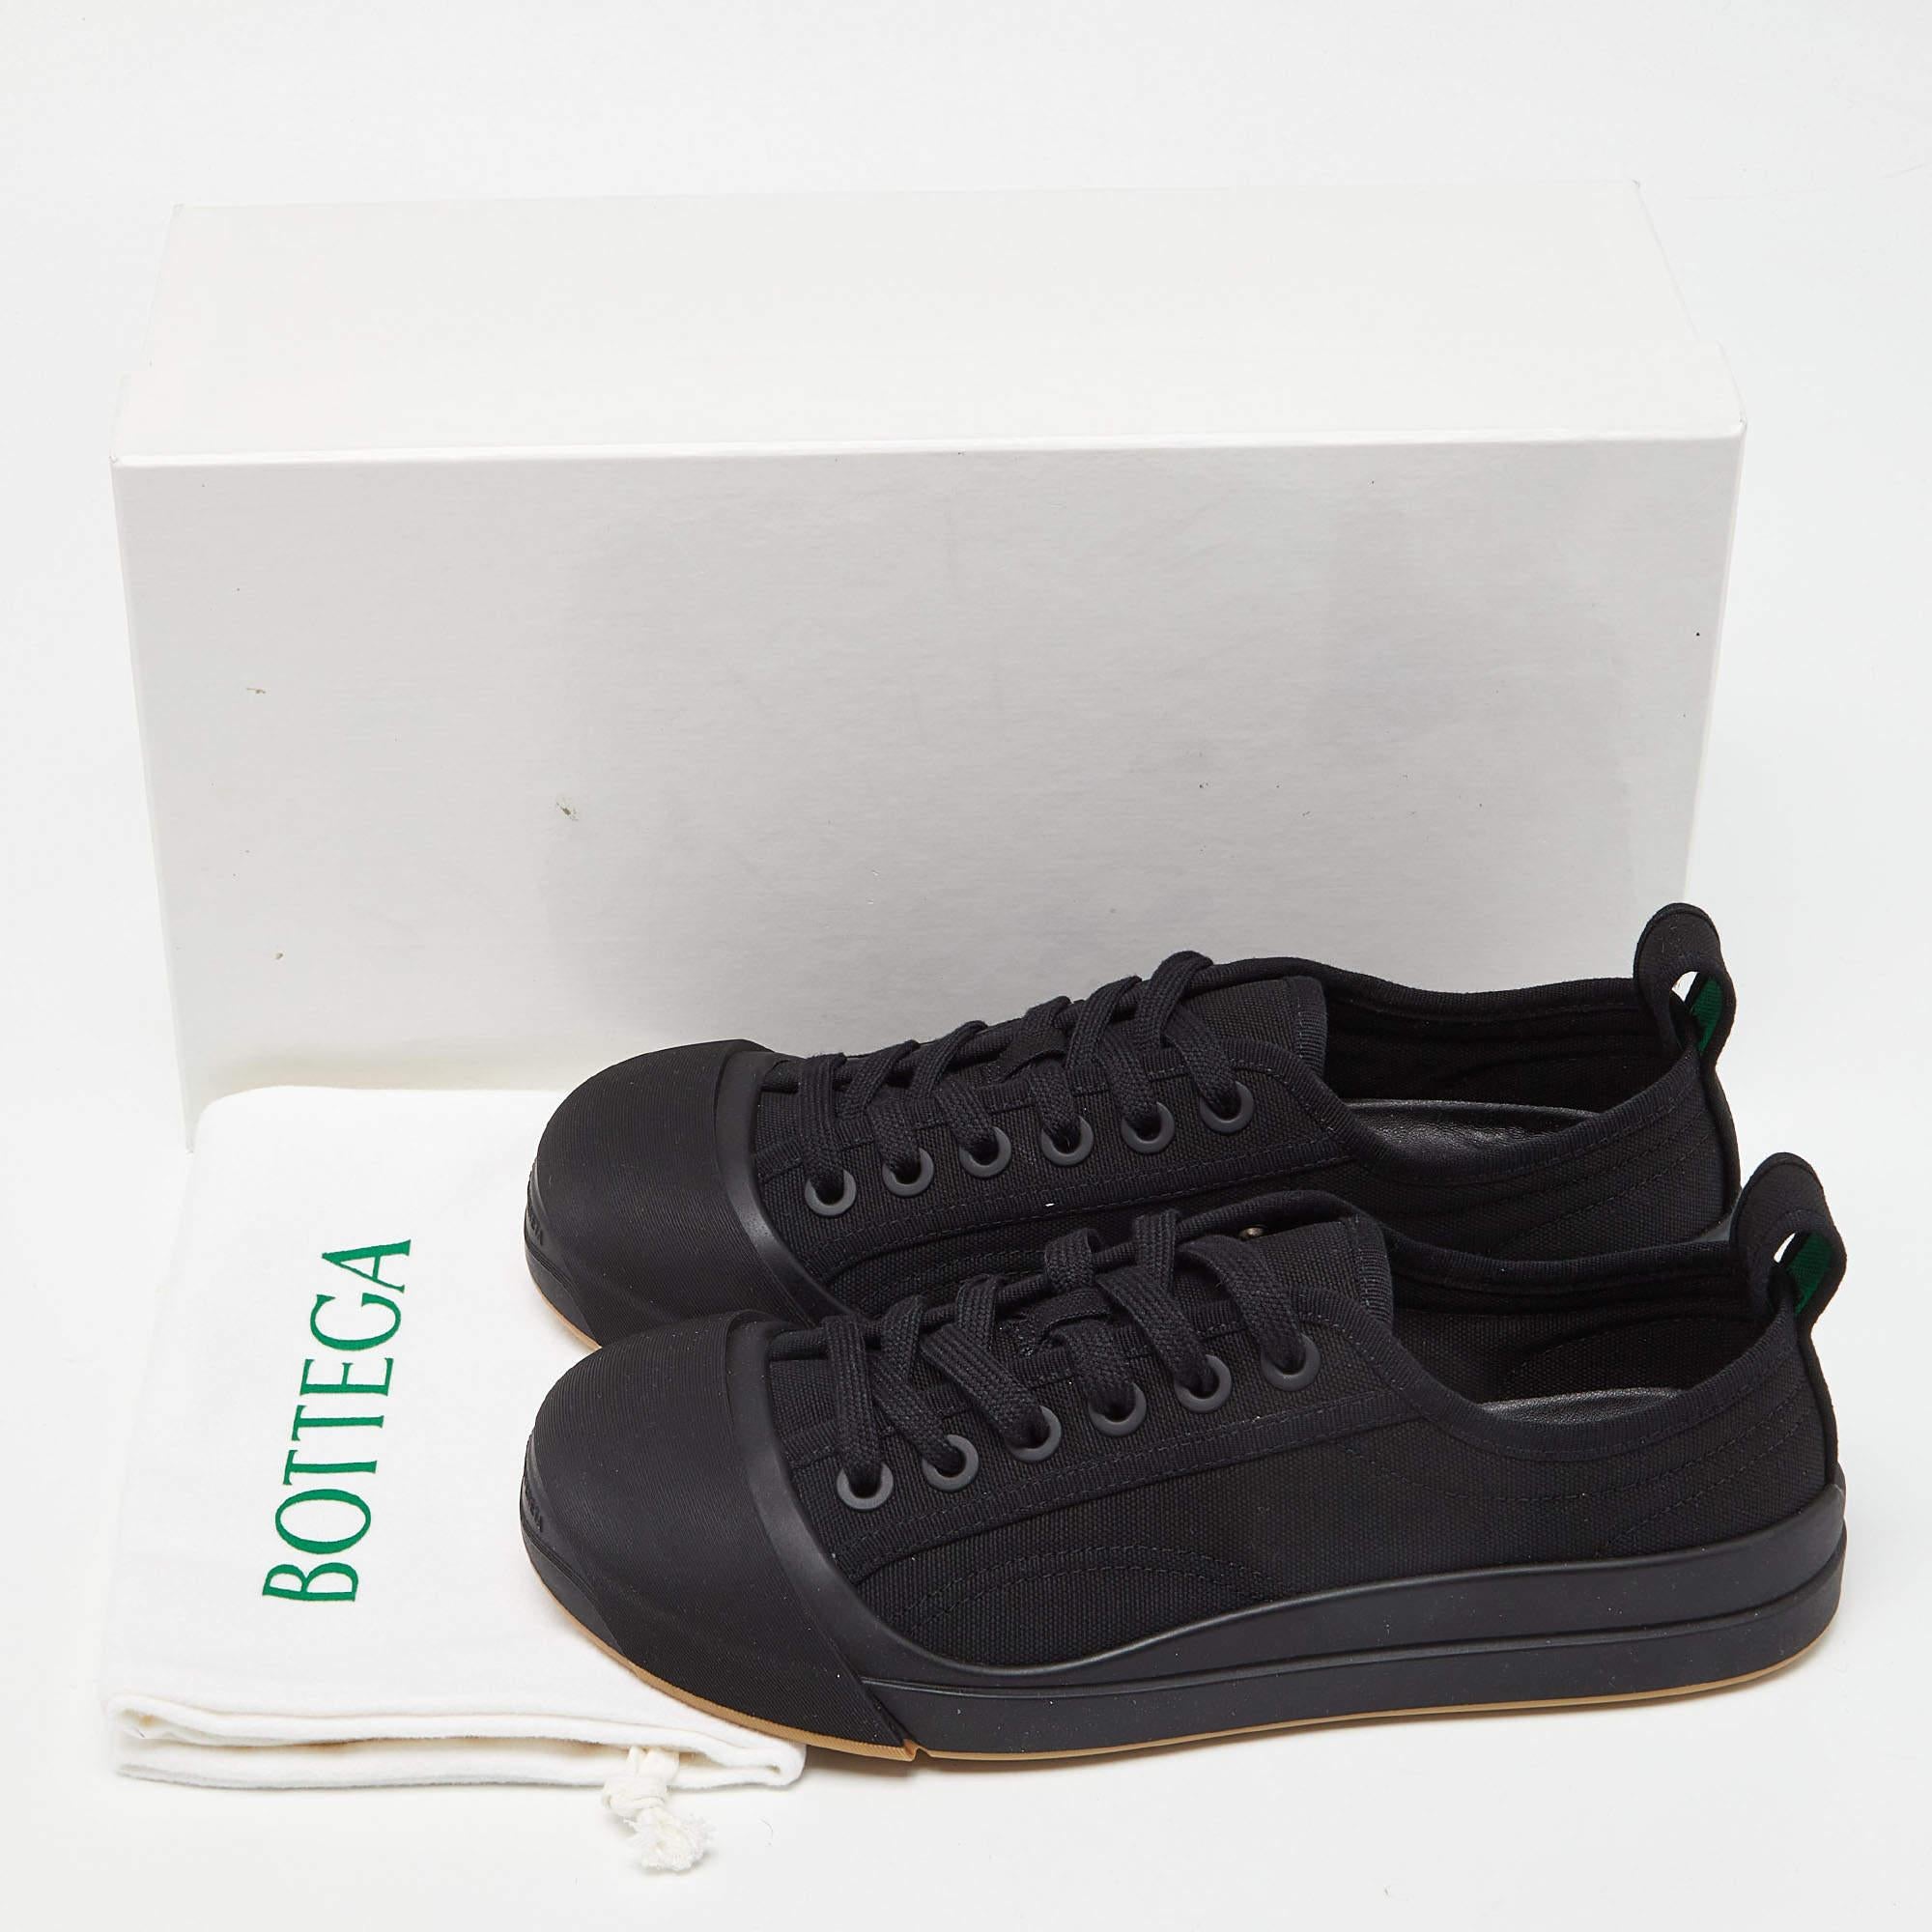 Bottega Veneta Black Canvas and Leather Vulcan Low Top Sneakers Size 38.5 For Sale 5